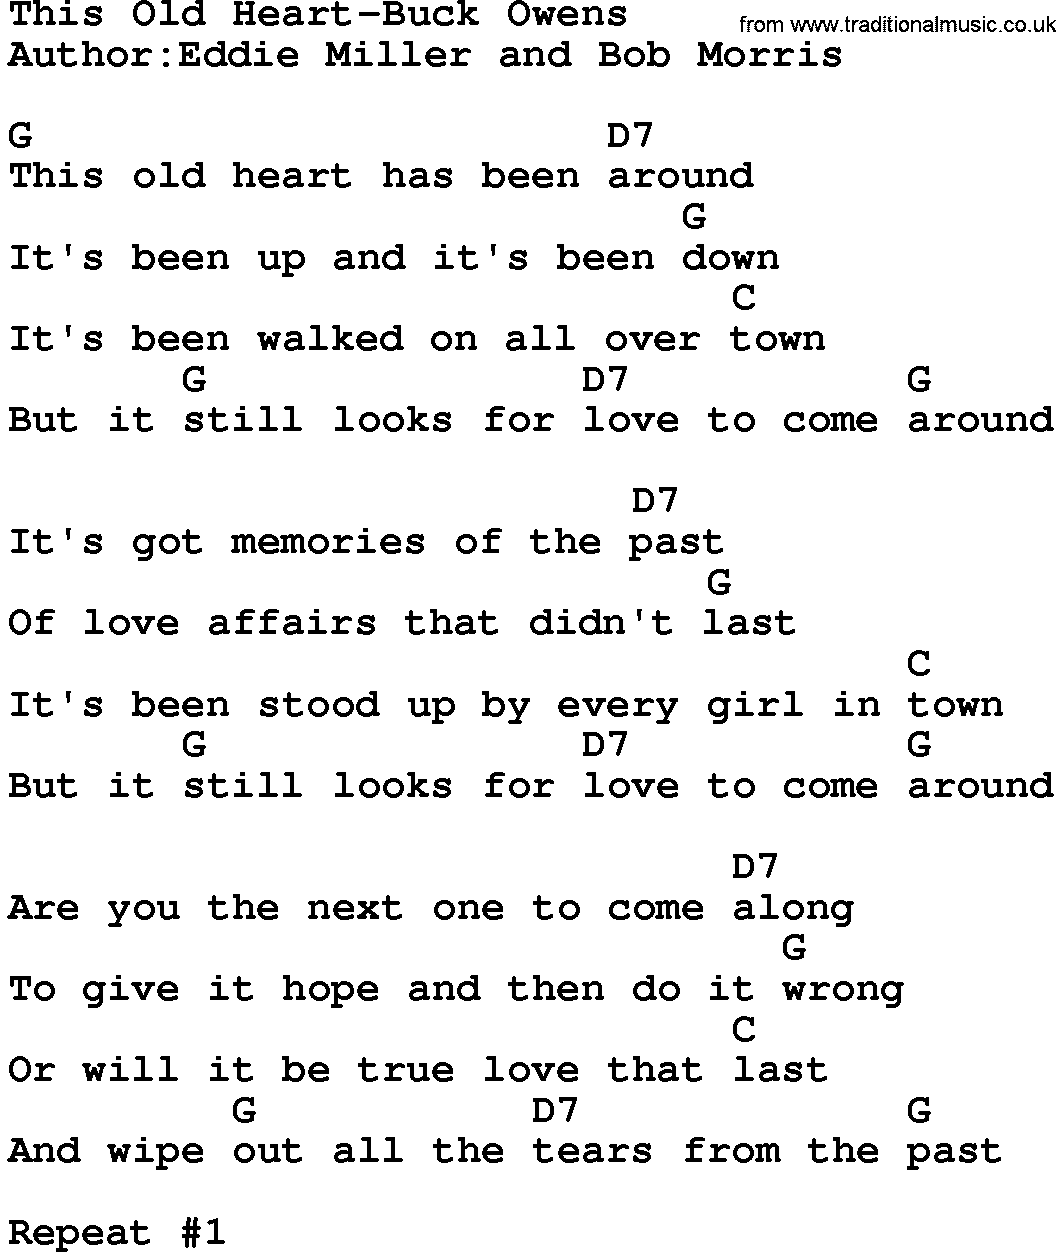 Country music song: This Old Heart-Buck Owens lyrics and chords